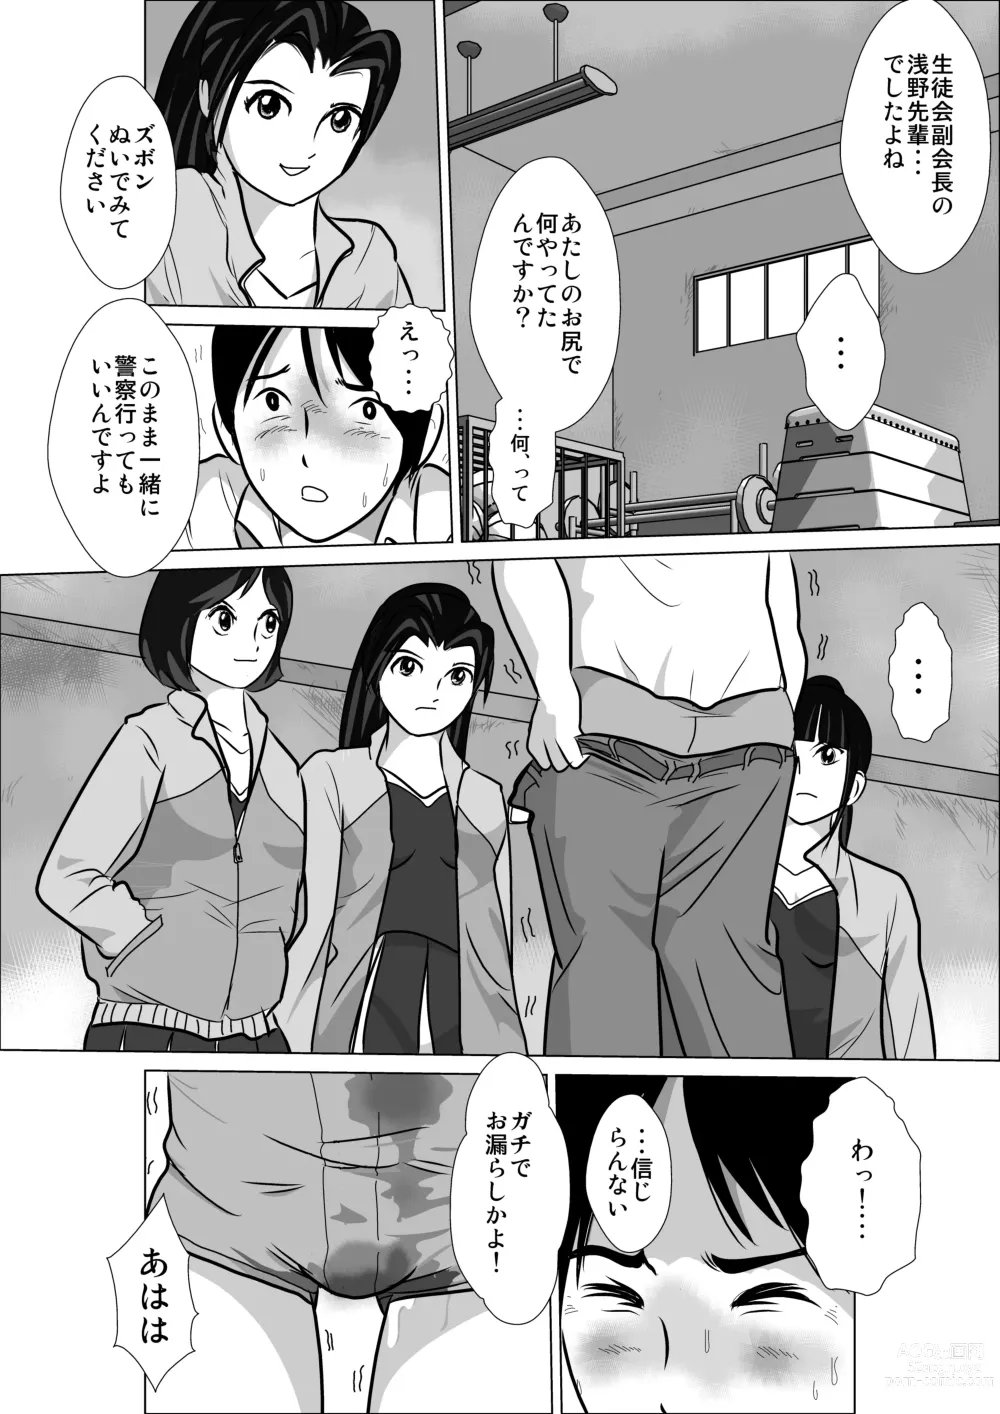 Page 32 of doujinshi LOVE IS THE PLAN Chapter 5